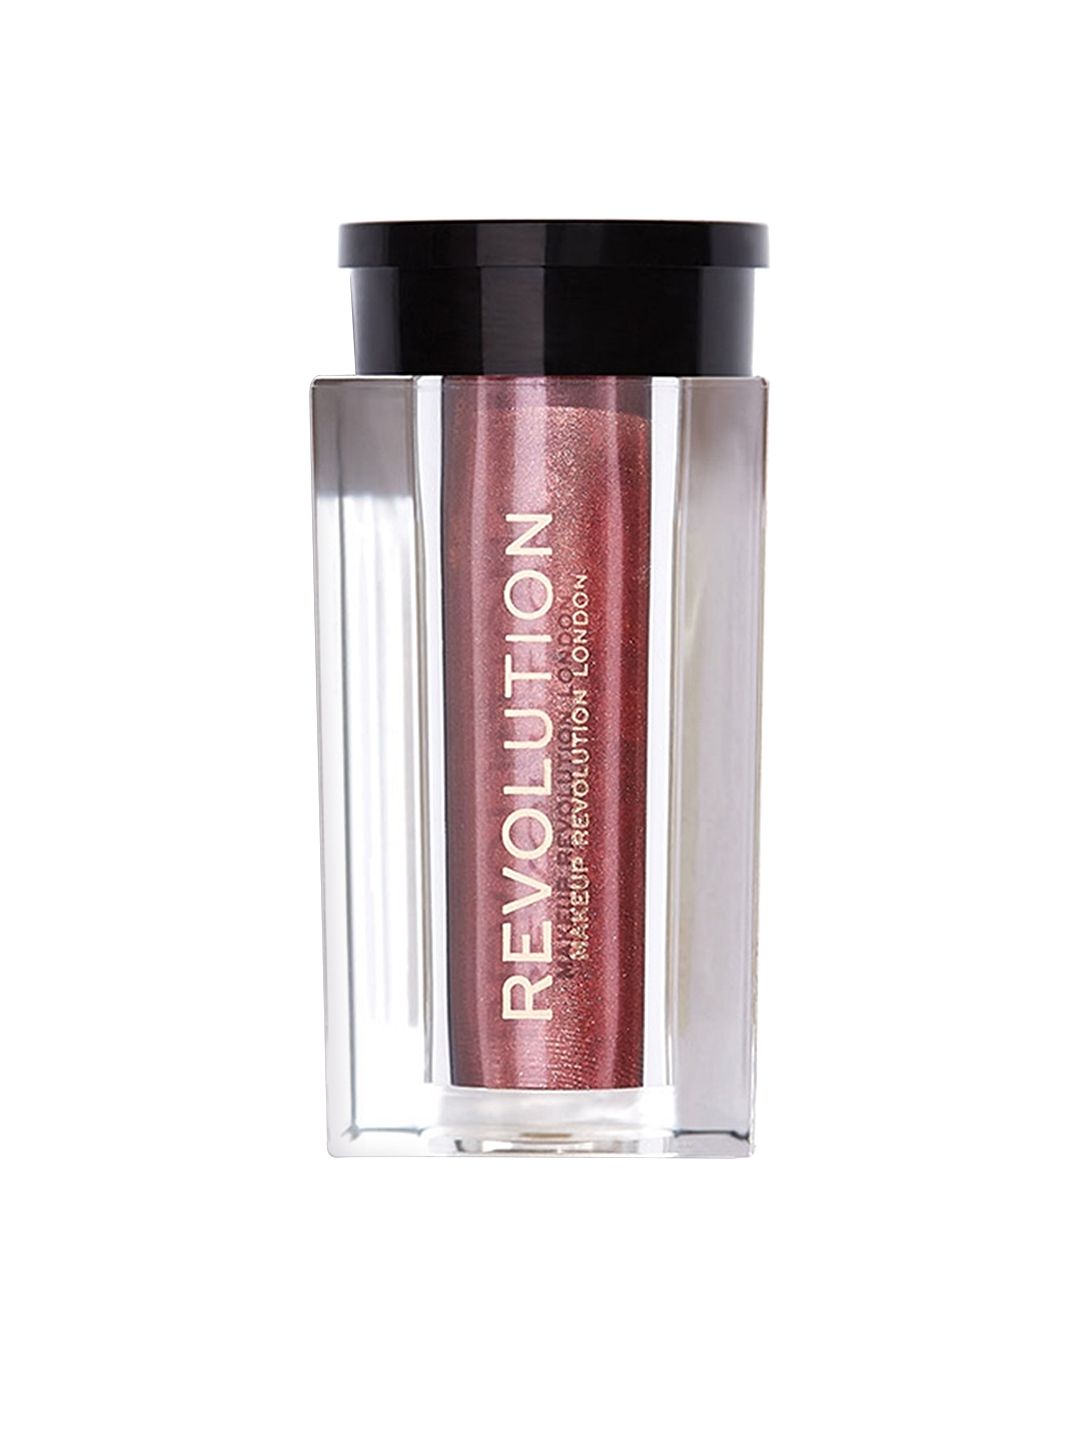 Makeup Revolution London Crushed Pearl Eye & Face Pigments - Red Vindictive 2.8 g Price in India